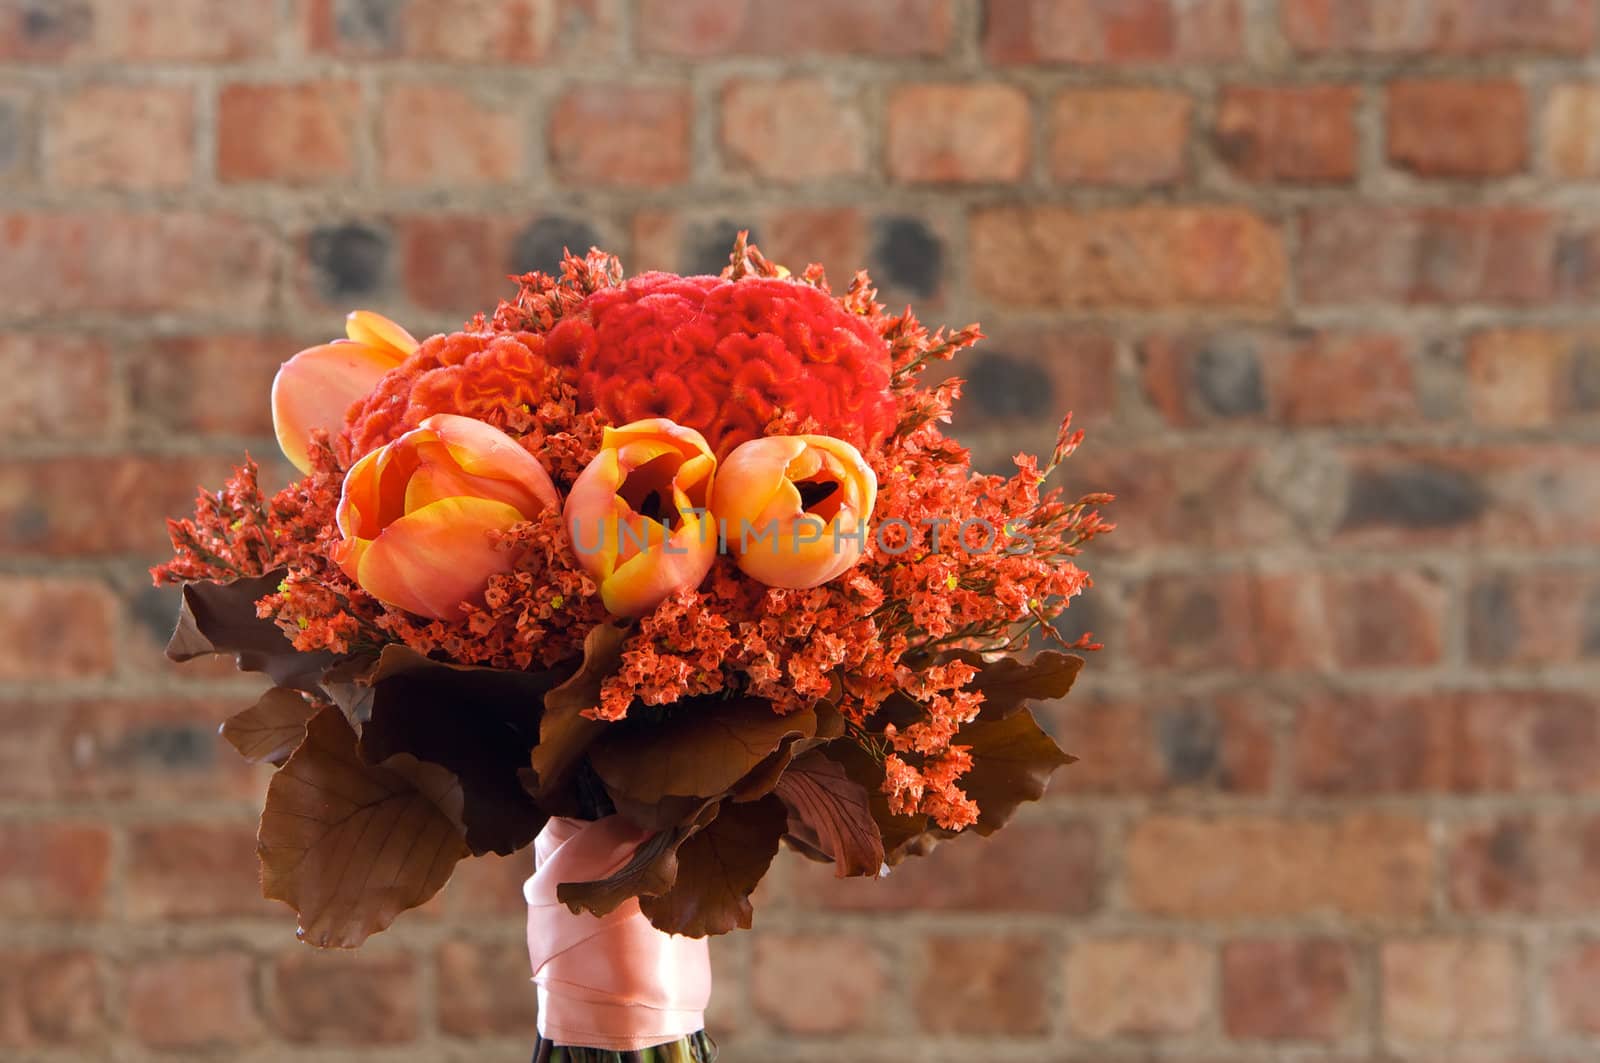 A colorful red and orange bridal bouquet of flowers